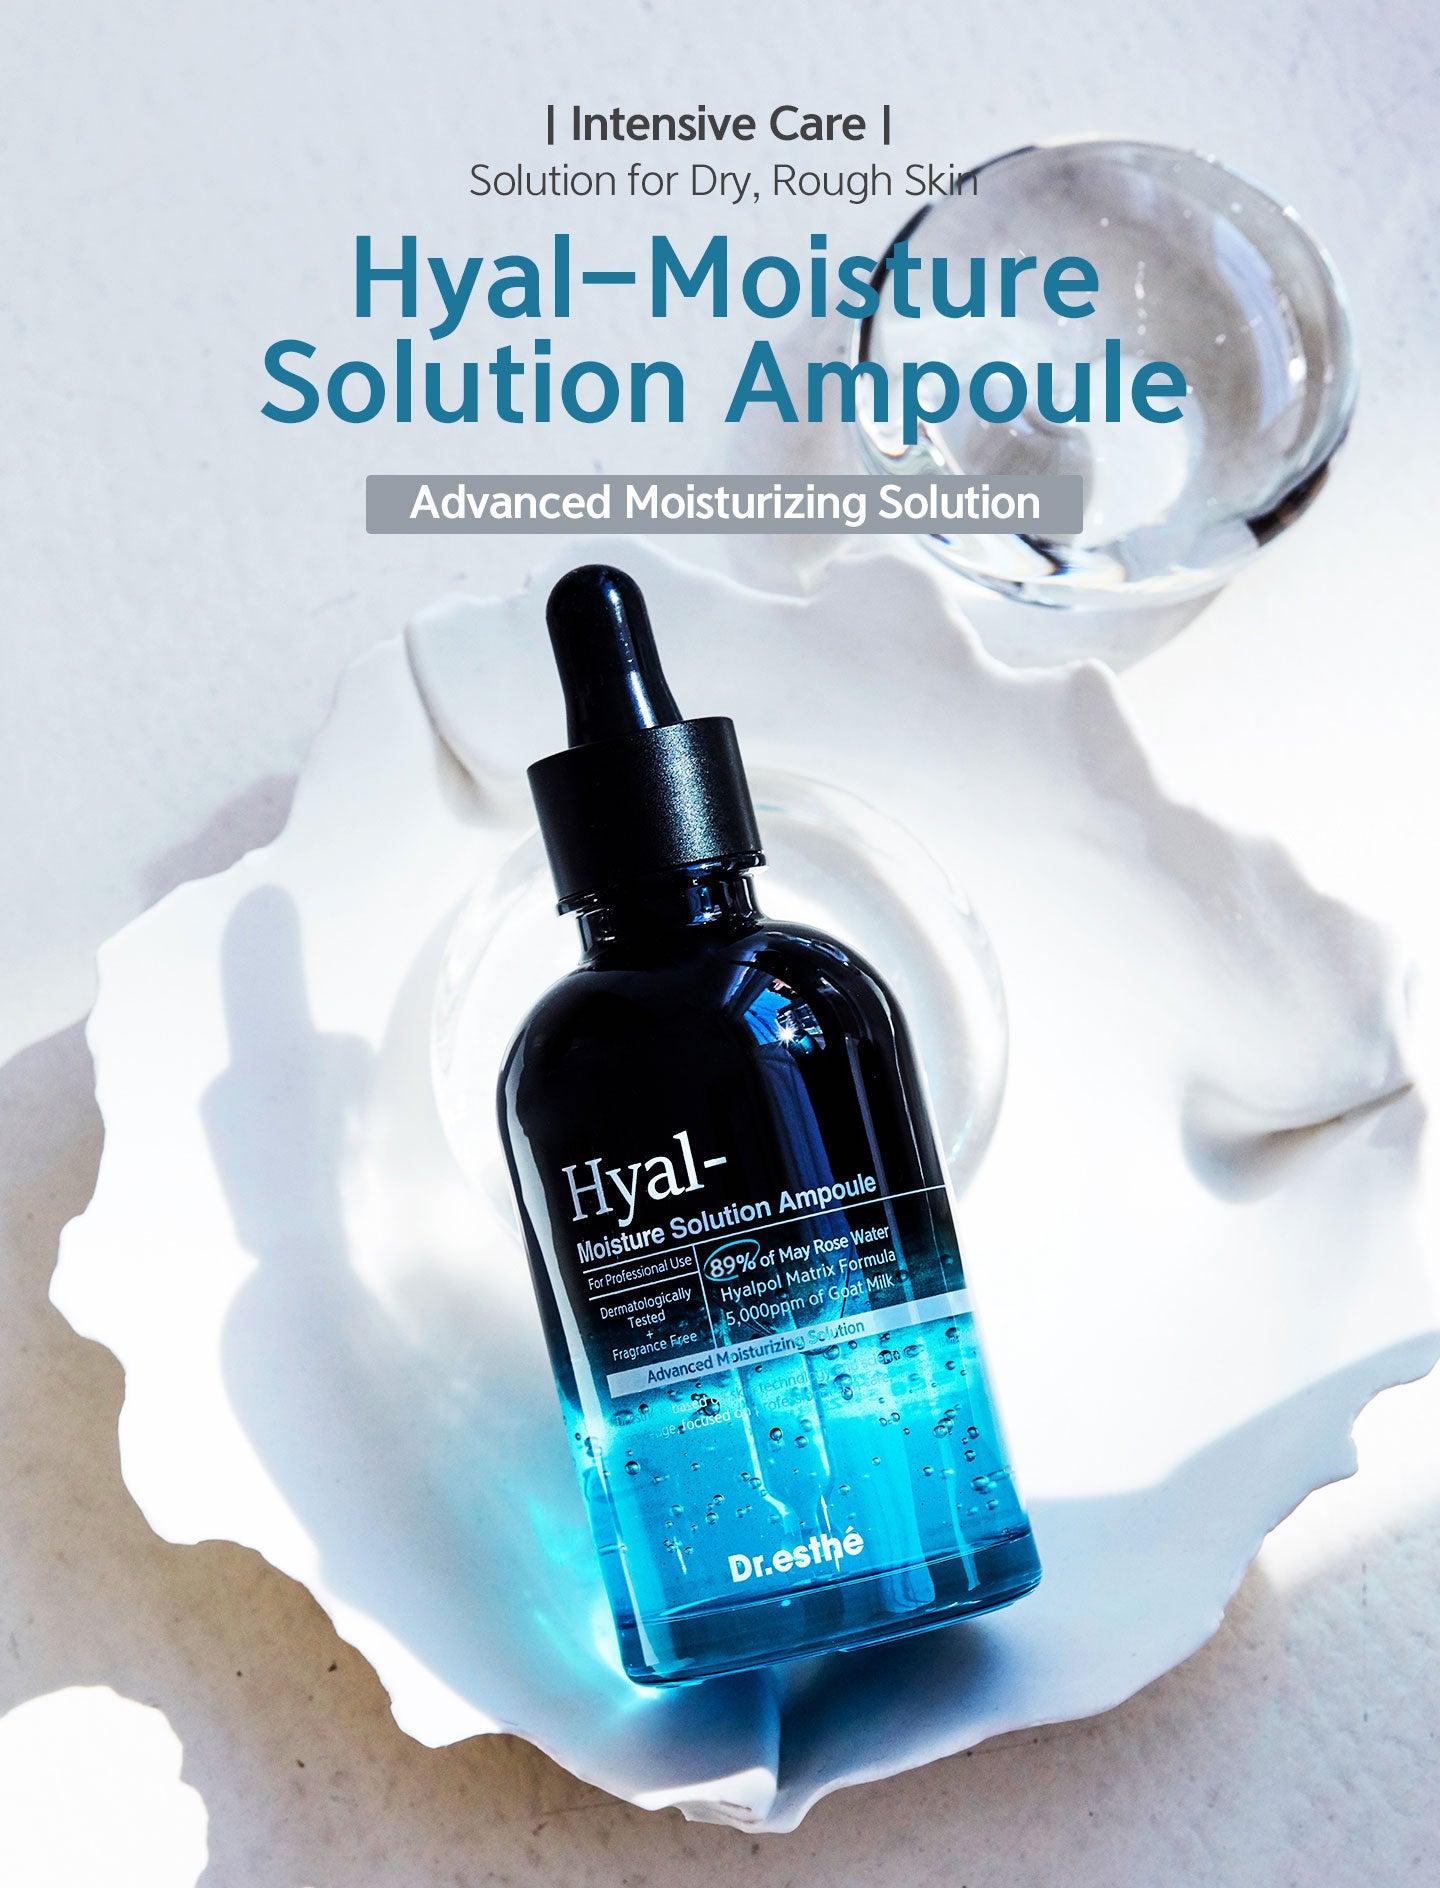 Intensive care solution for dry, rough skin. Hyal-moisture solution ampoule, advanced moisturizing solution.